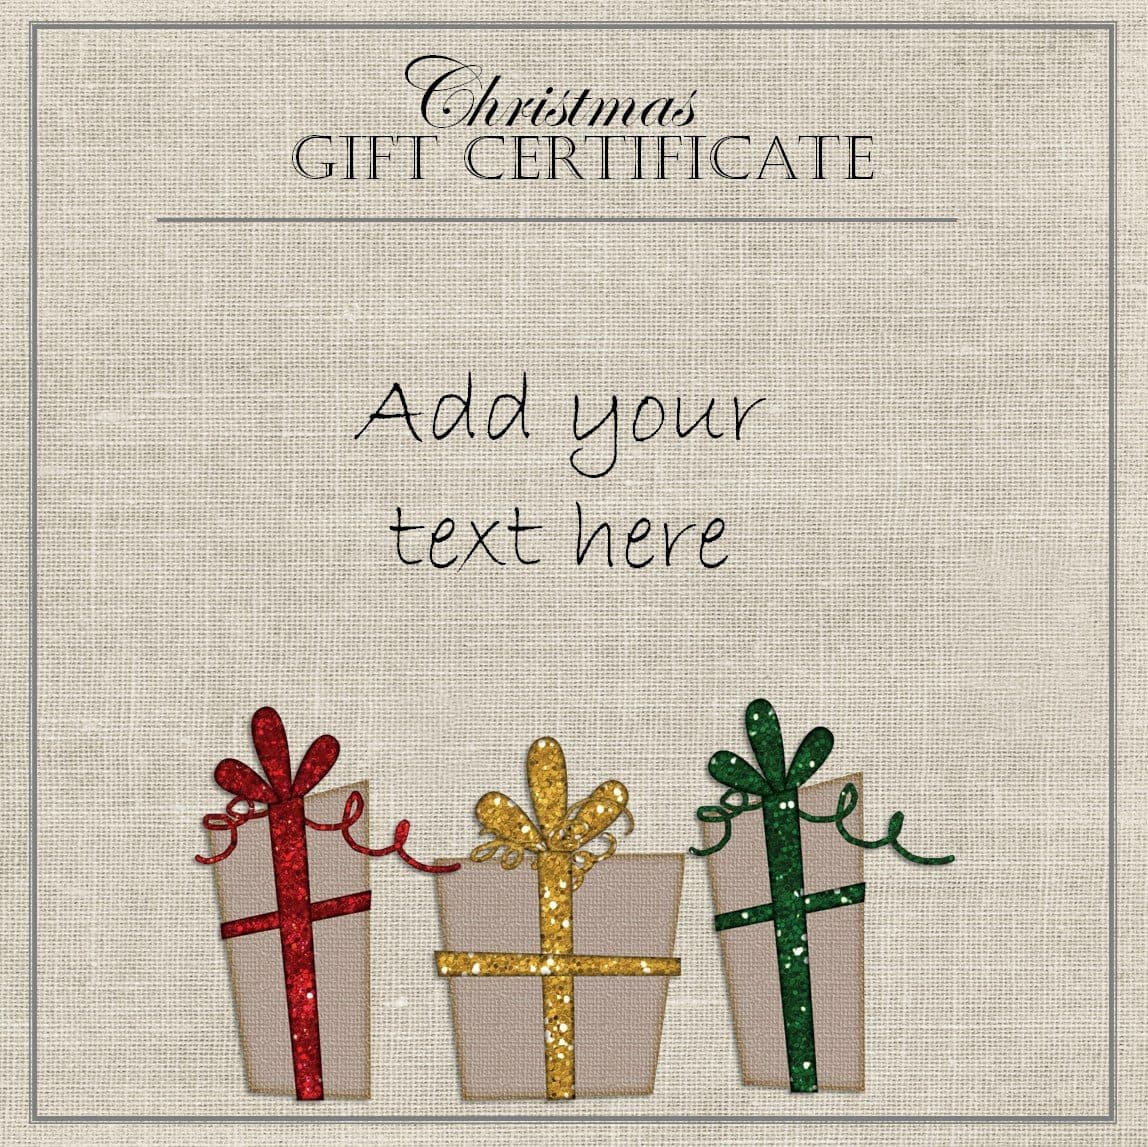 christmas-gift-certificate-templates